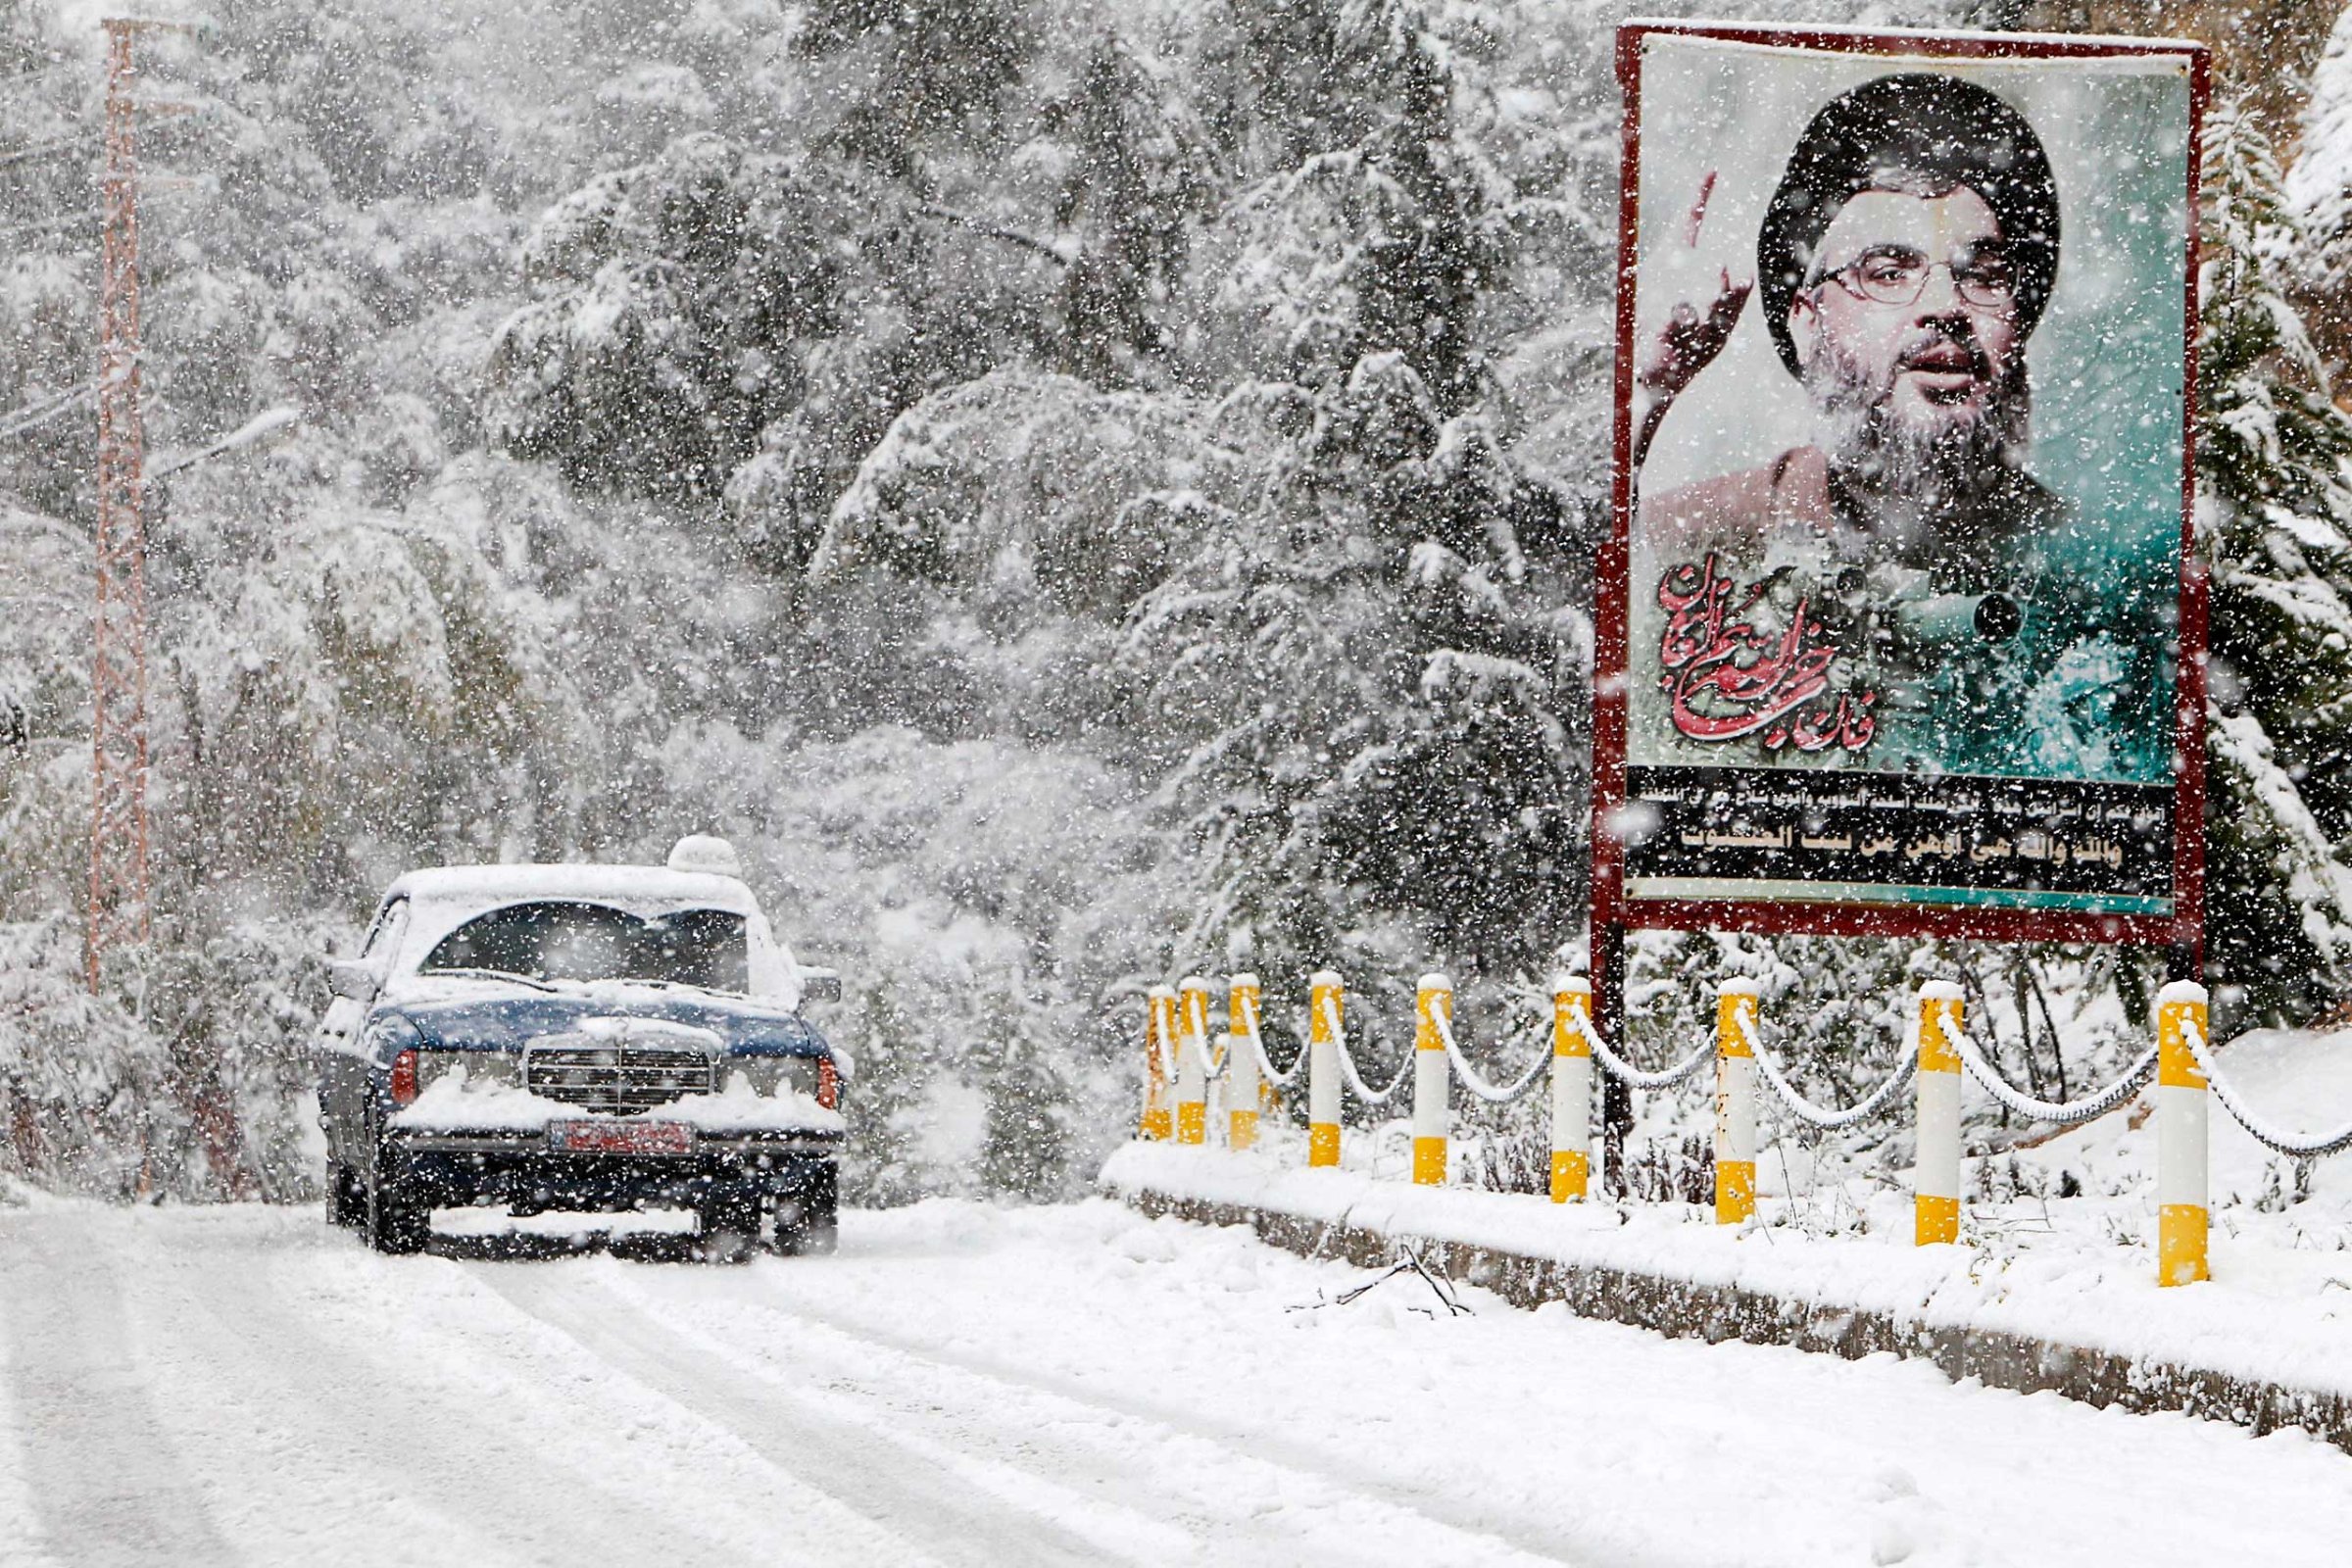 A snow covered taxi drives past a picture of Lebanon's Hezbollah leader Sayyed Hasan Nasrallah in Jbaa village, south Lebanon, Feb. 20, 2015.